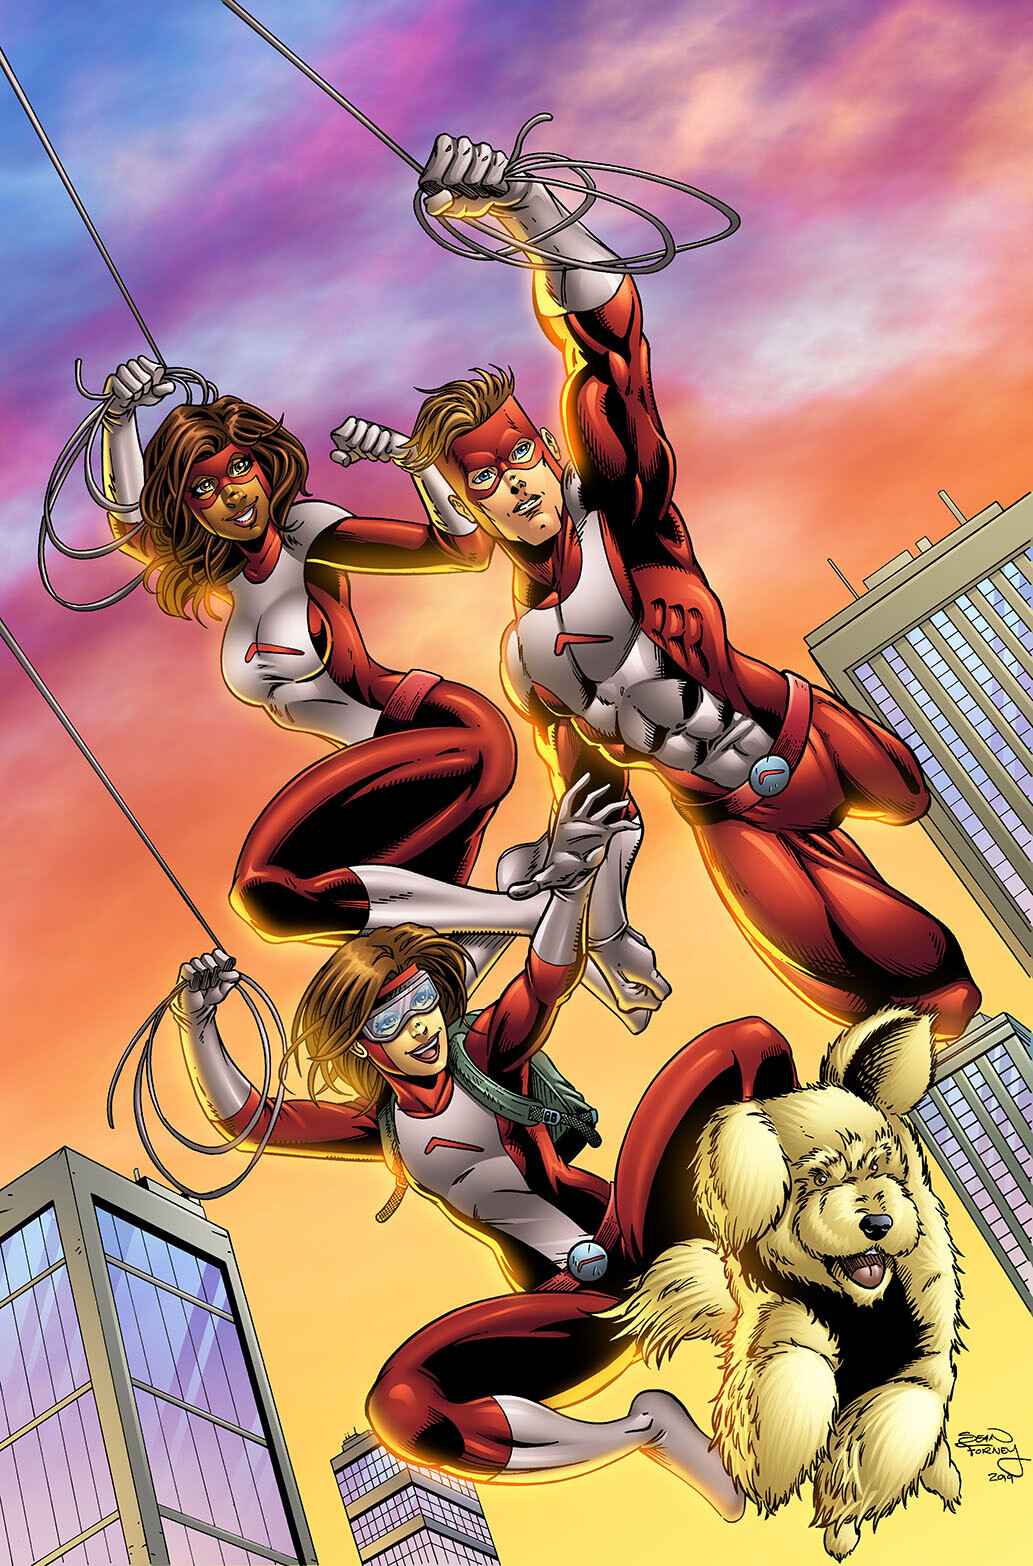 Budget Heroes - Red Roof Inn

pencils, inks, and colors by Sean Forney